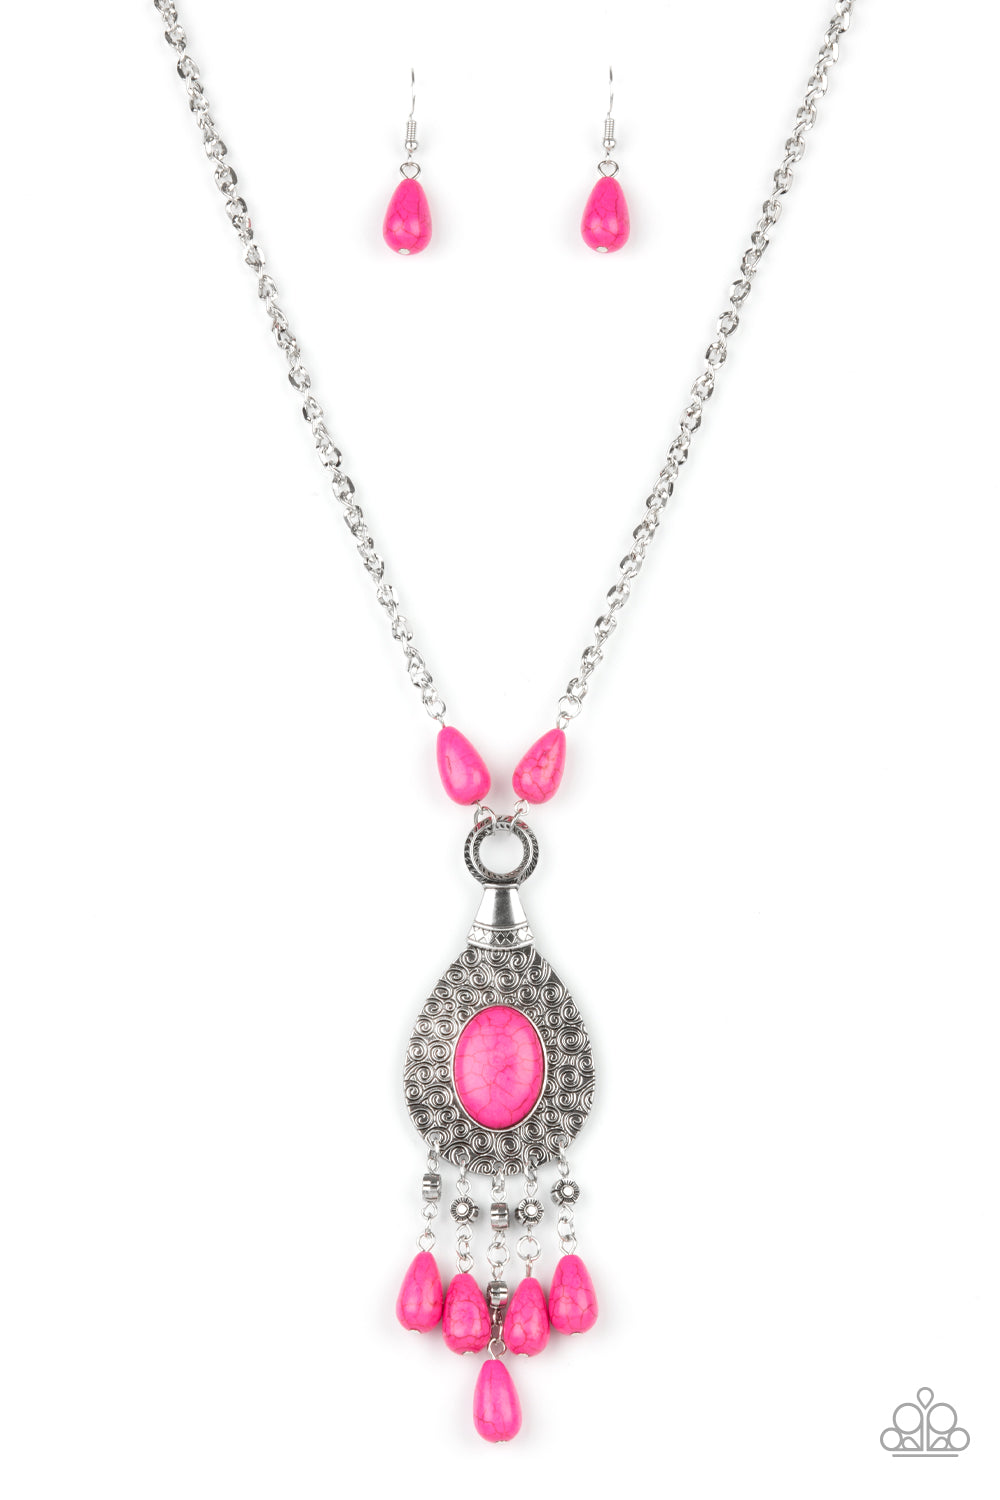 COWGIRL COUTURE - PINK NECKLACE